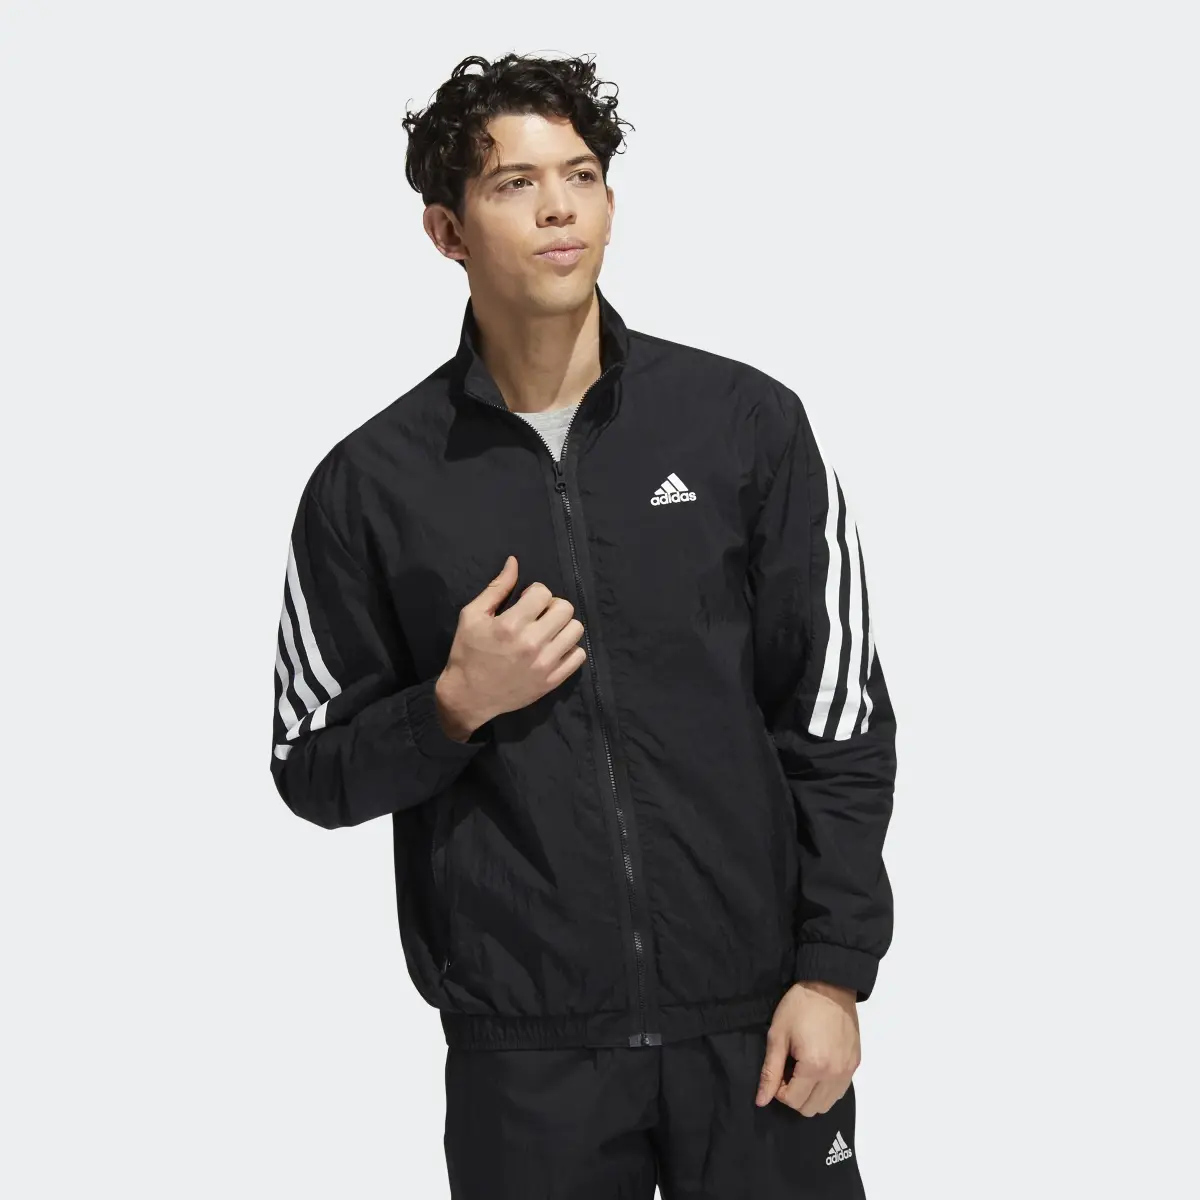 Adidas Future Icons 3-Stripes Woven Track Top. 2